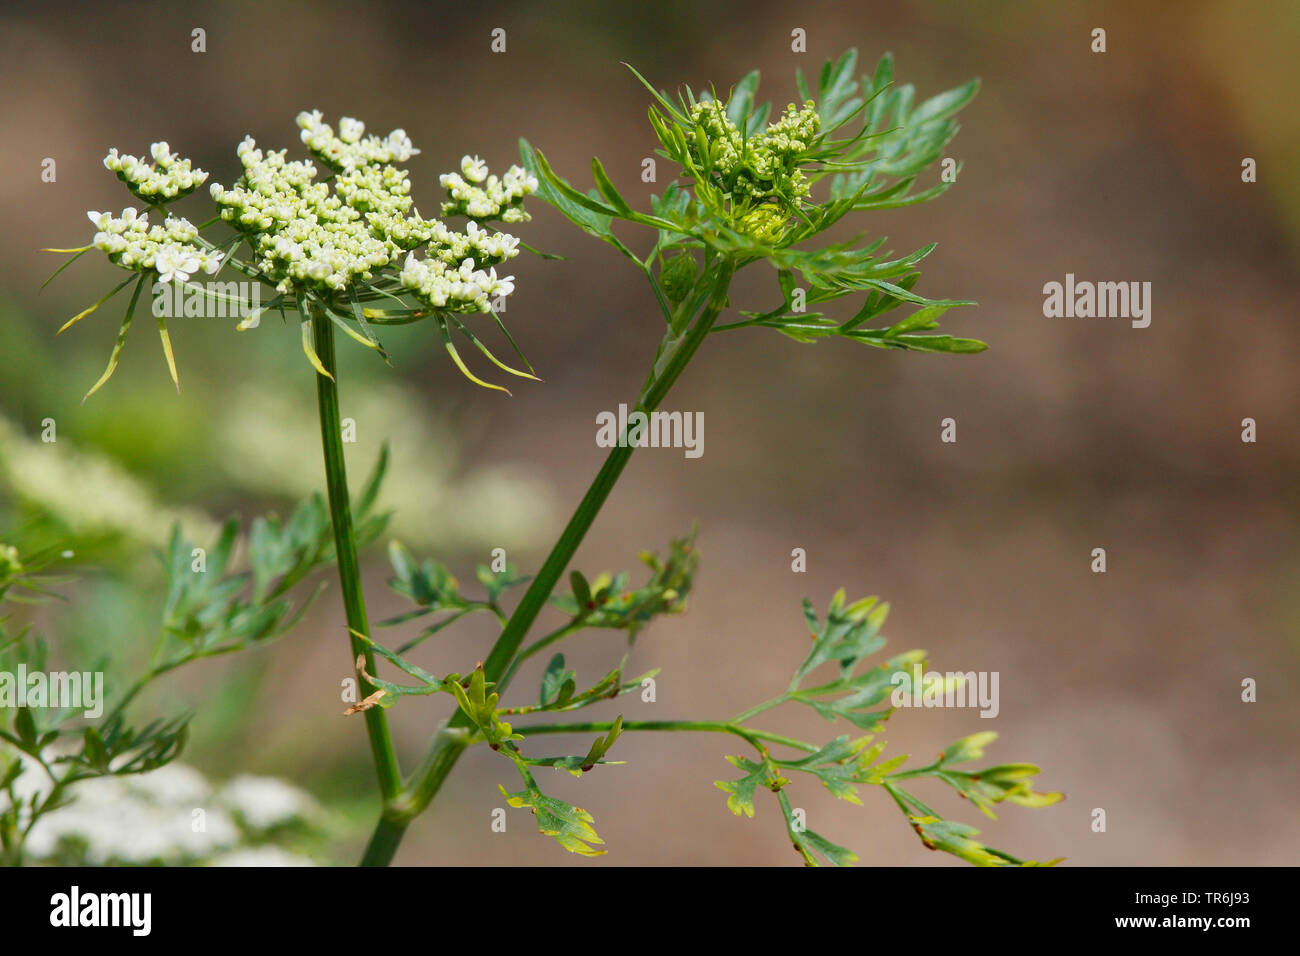 Fool's parsley, Fool's cicely, Poison parsley (Aethusa cynapium, Aethusa cynapium subsp. cynapium), blooming, Germany Stock Photo